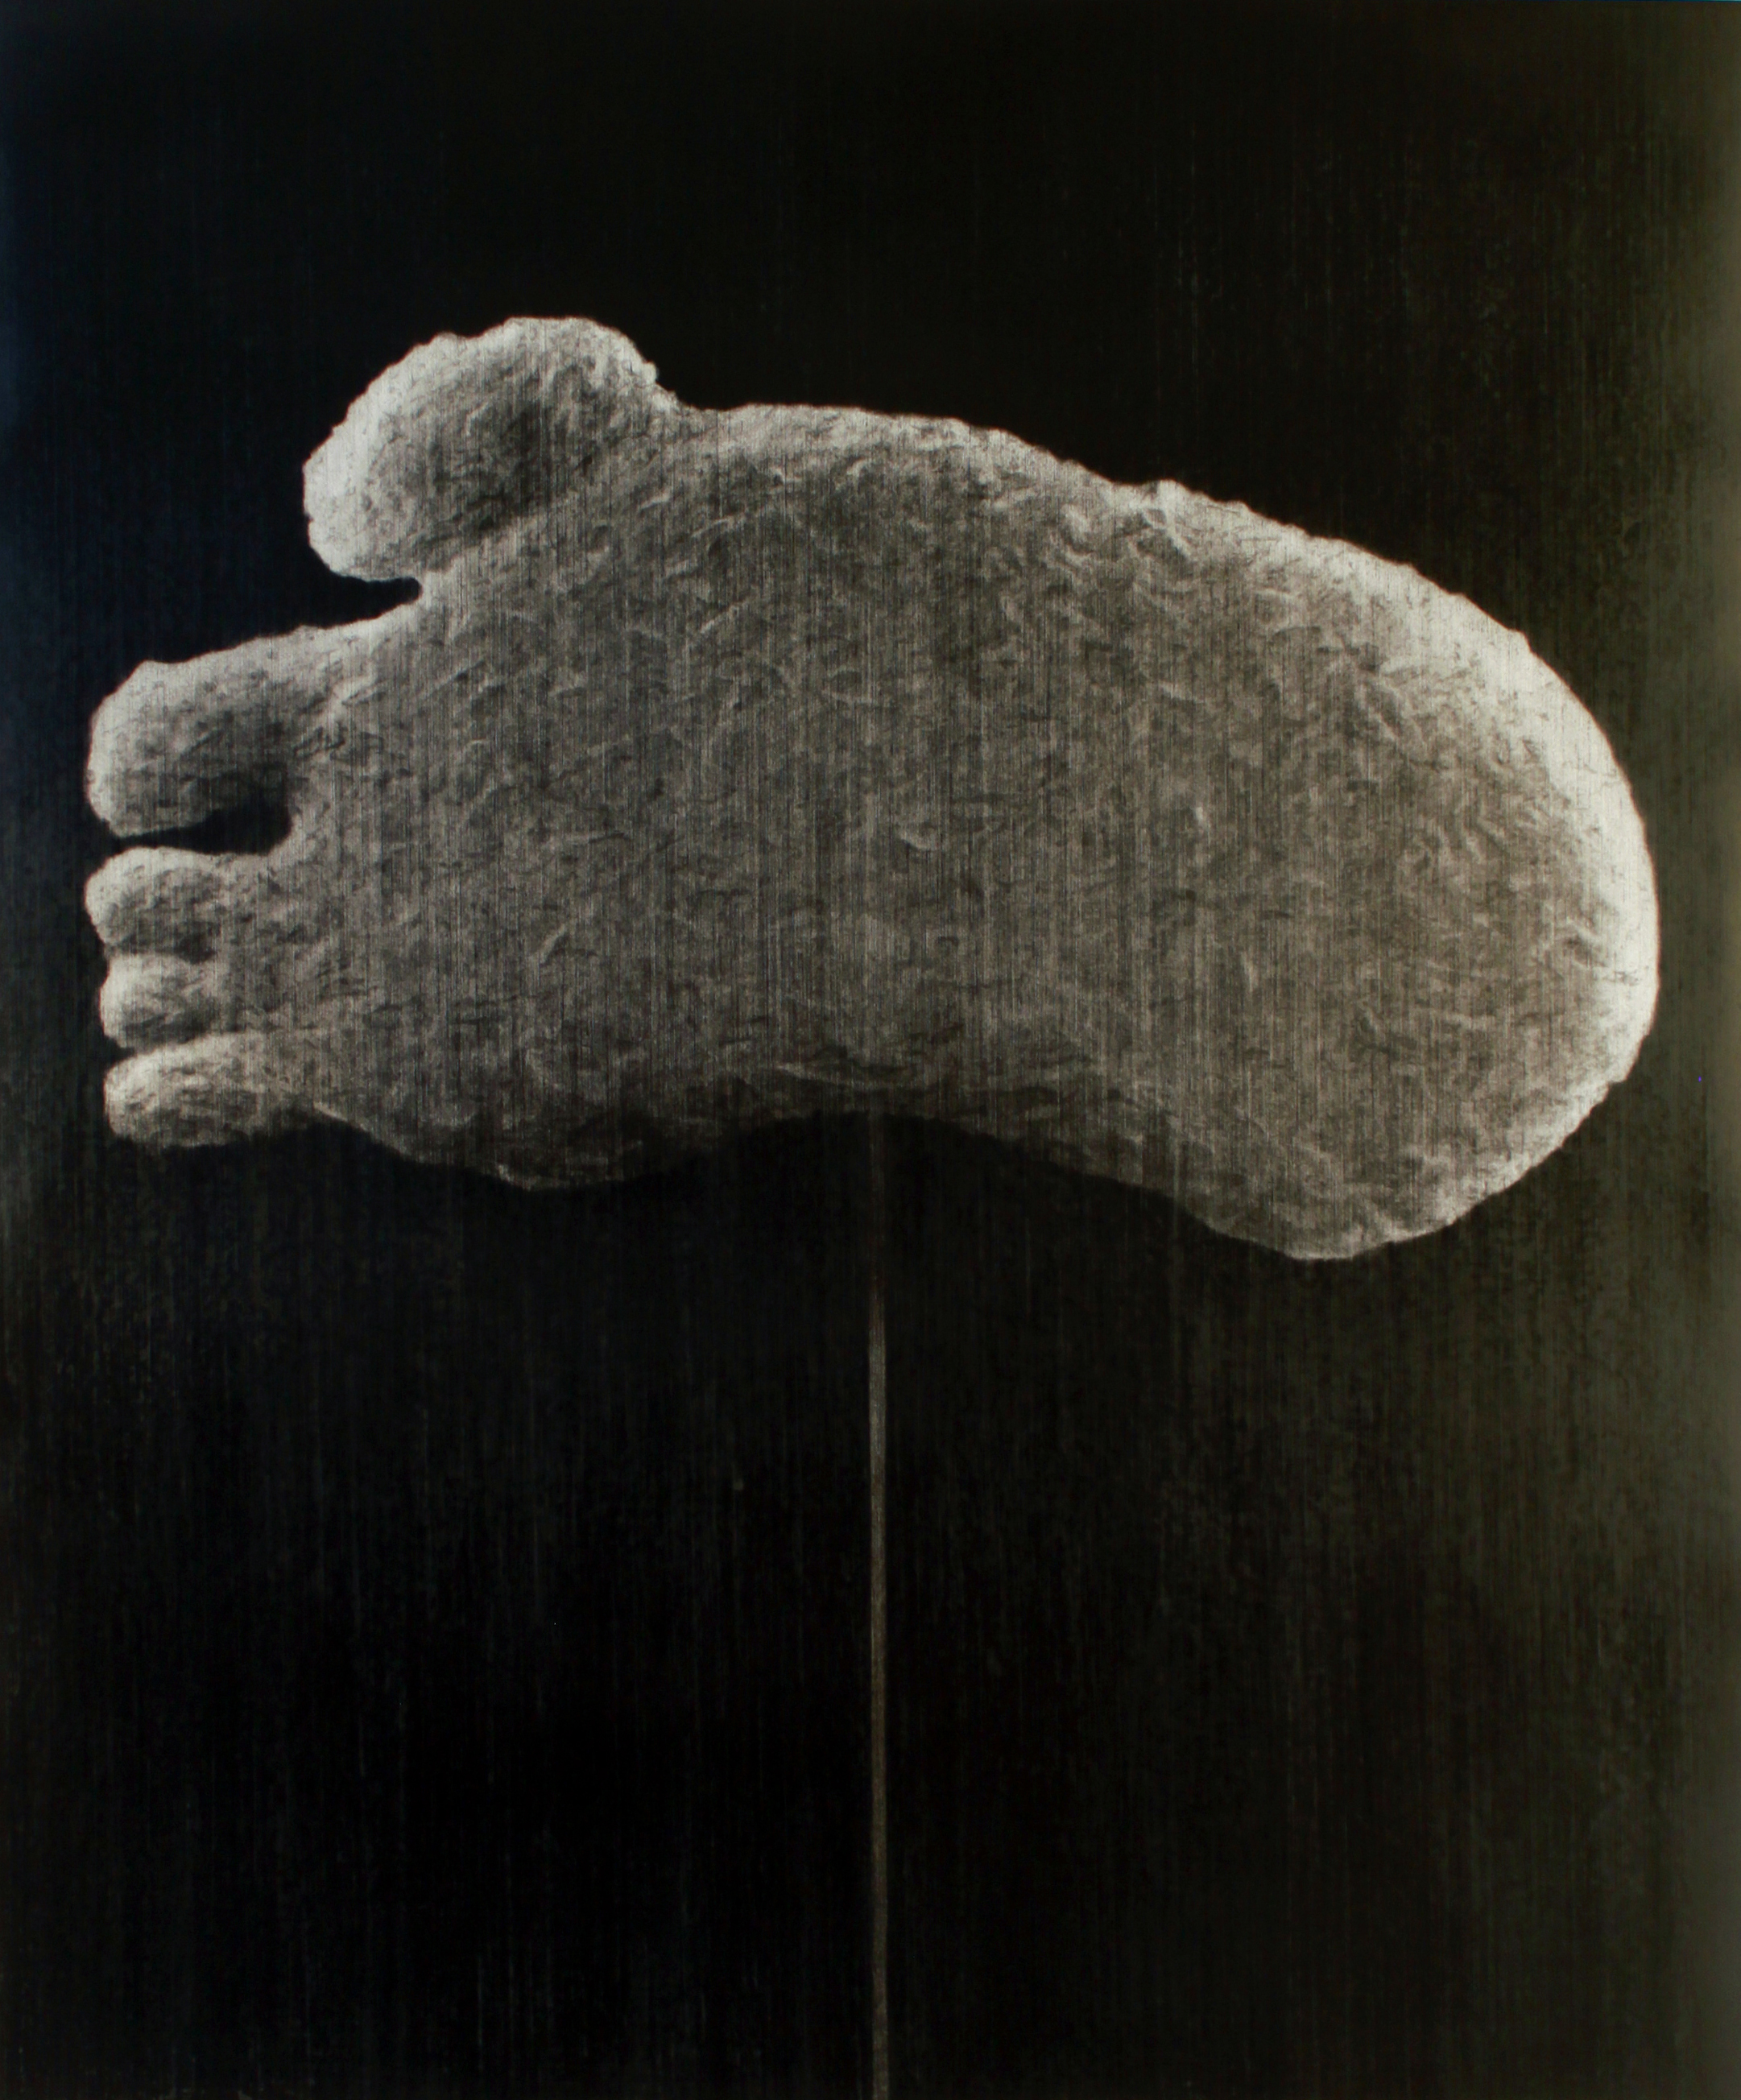   The Undisputed Heavyweight Champion Of The World . 2014. Charcoal on paper.&nbsp;130x110cm 